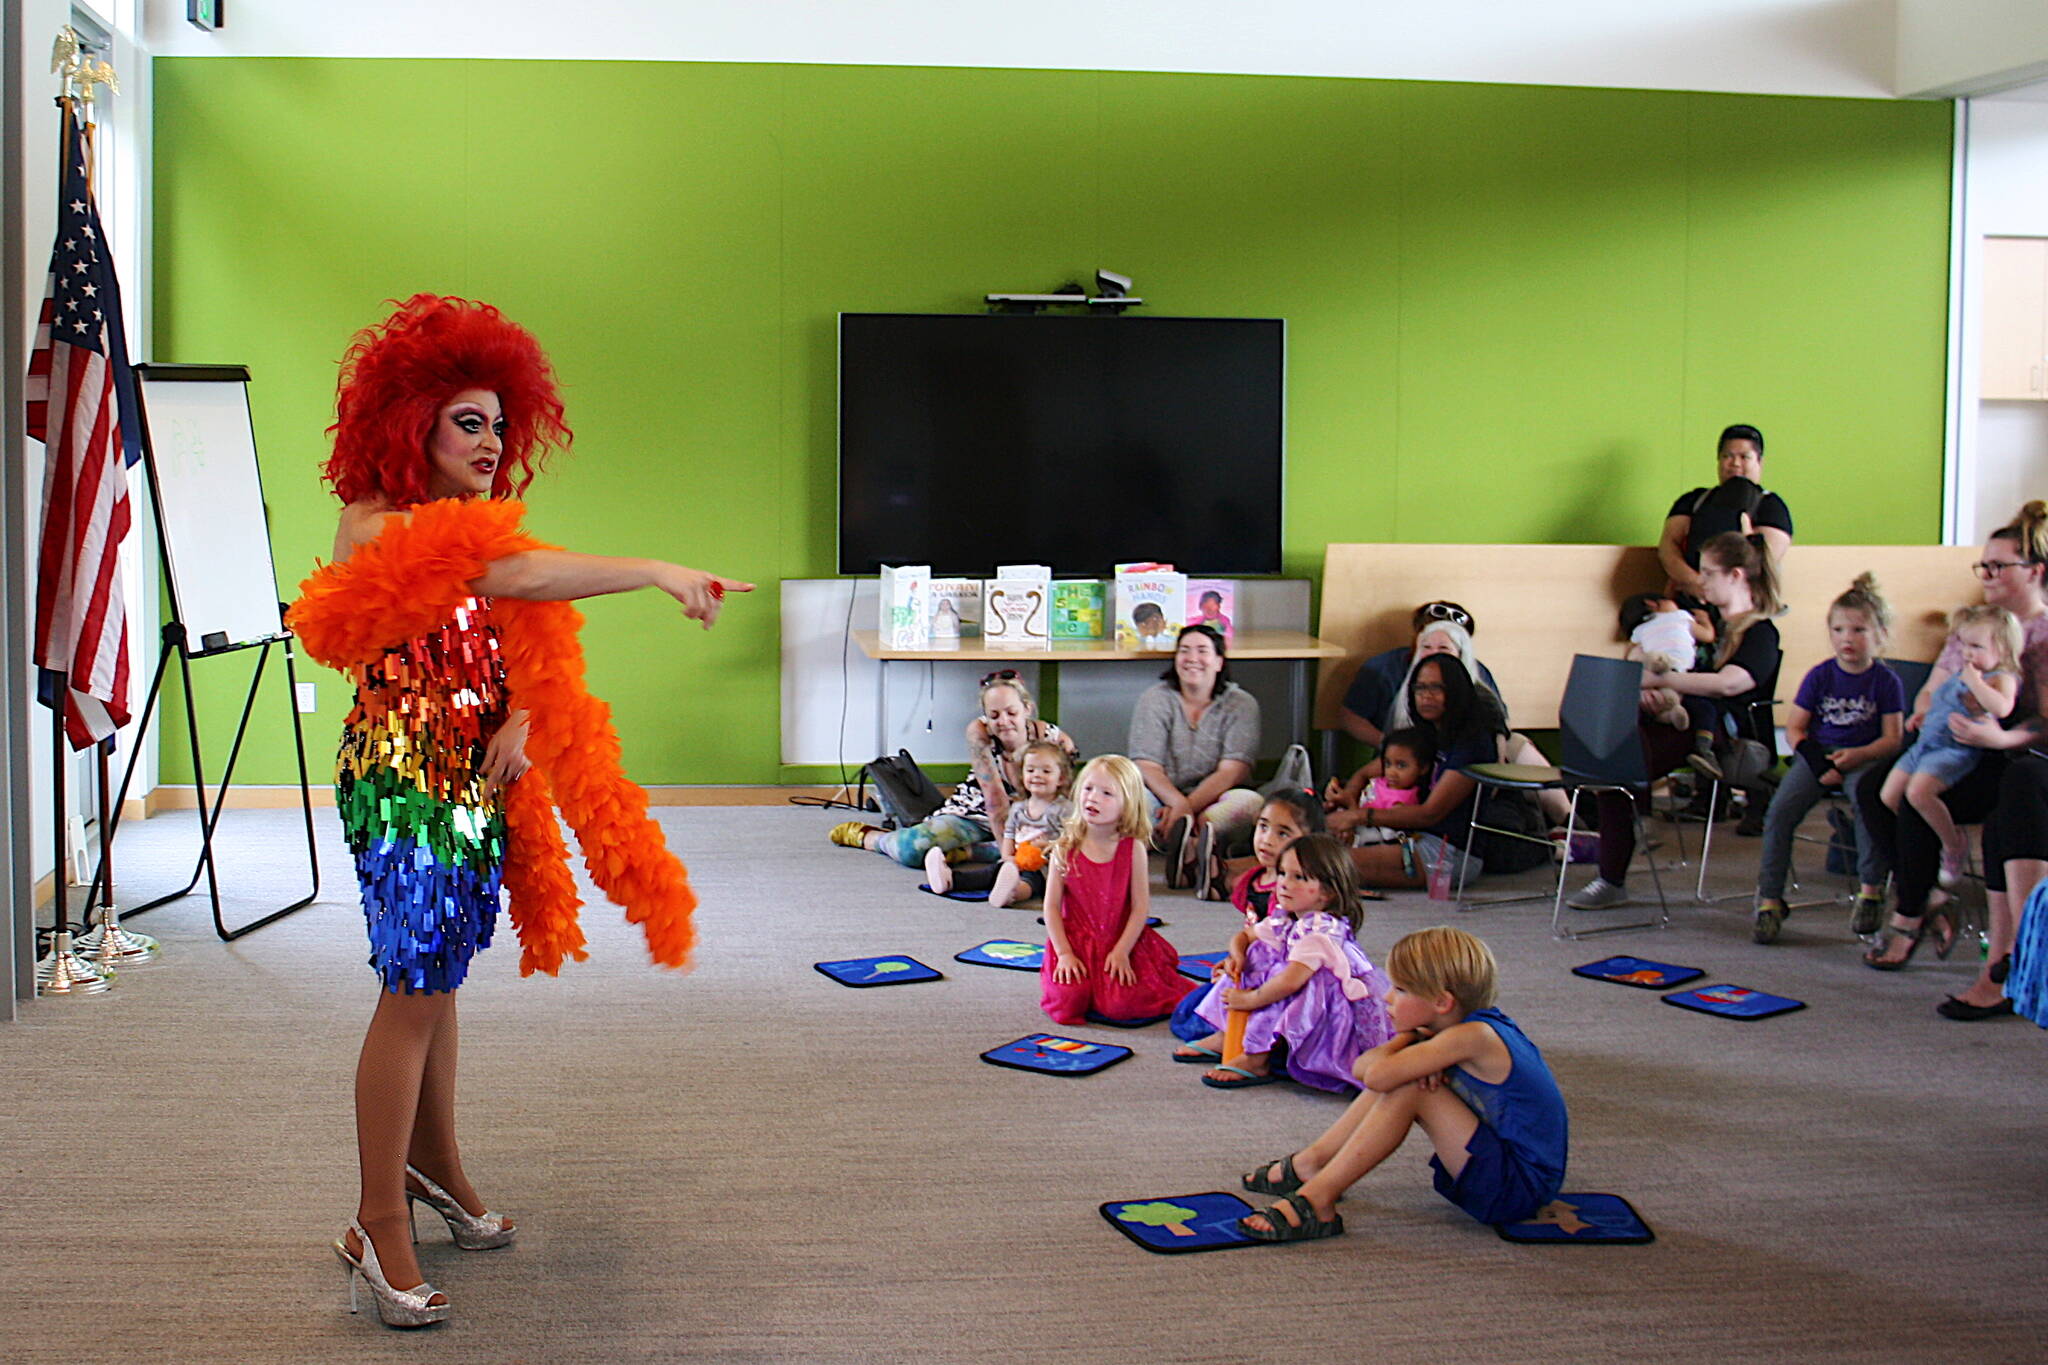 Drag queen Gigi Monroe performs an opening song during a Drag Storytime at the Mendenhall Valley Public Library on Saturday, Aug. 5. (Mark Sabbatini / Juneau Empire)